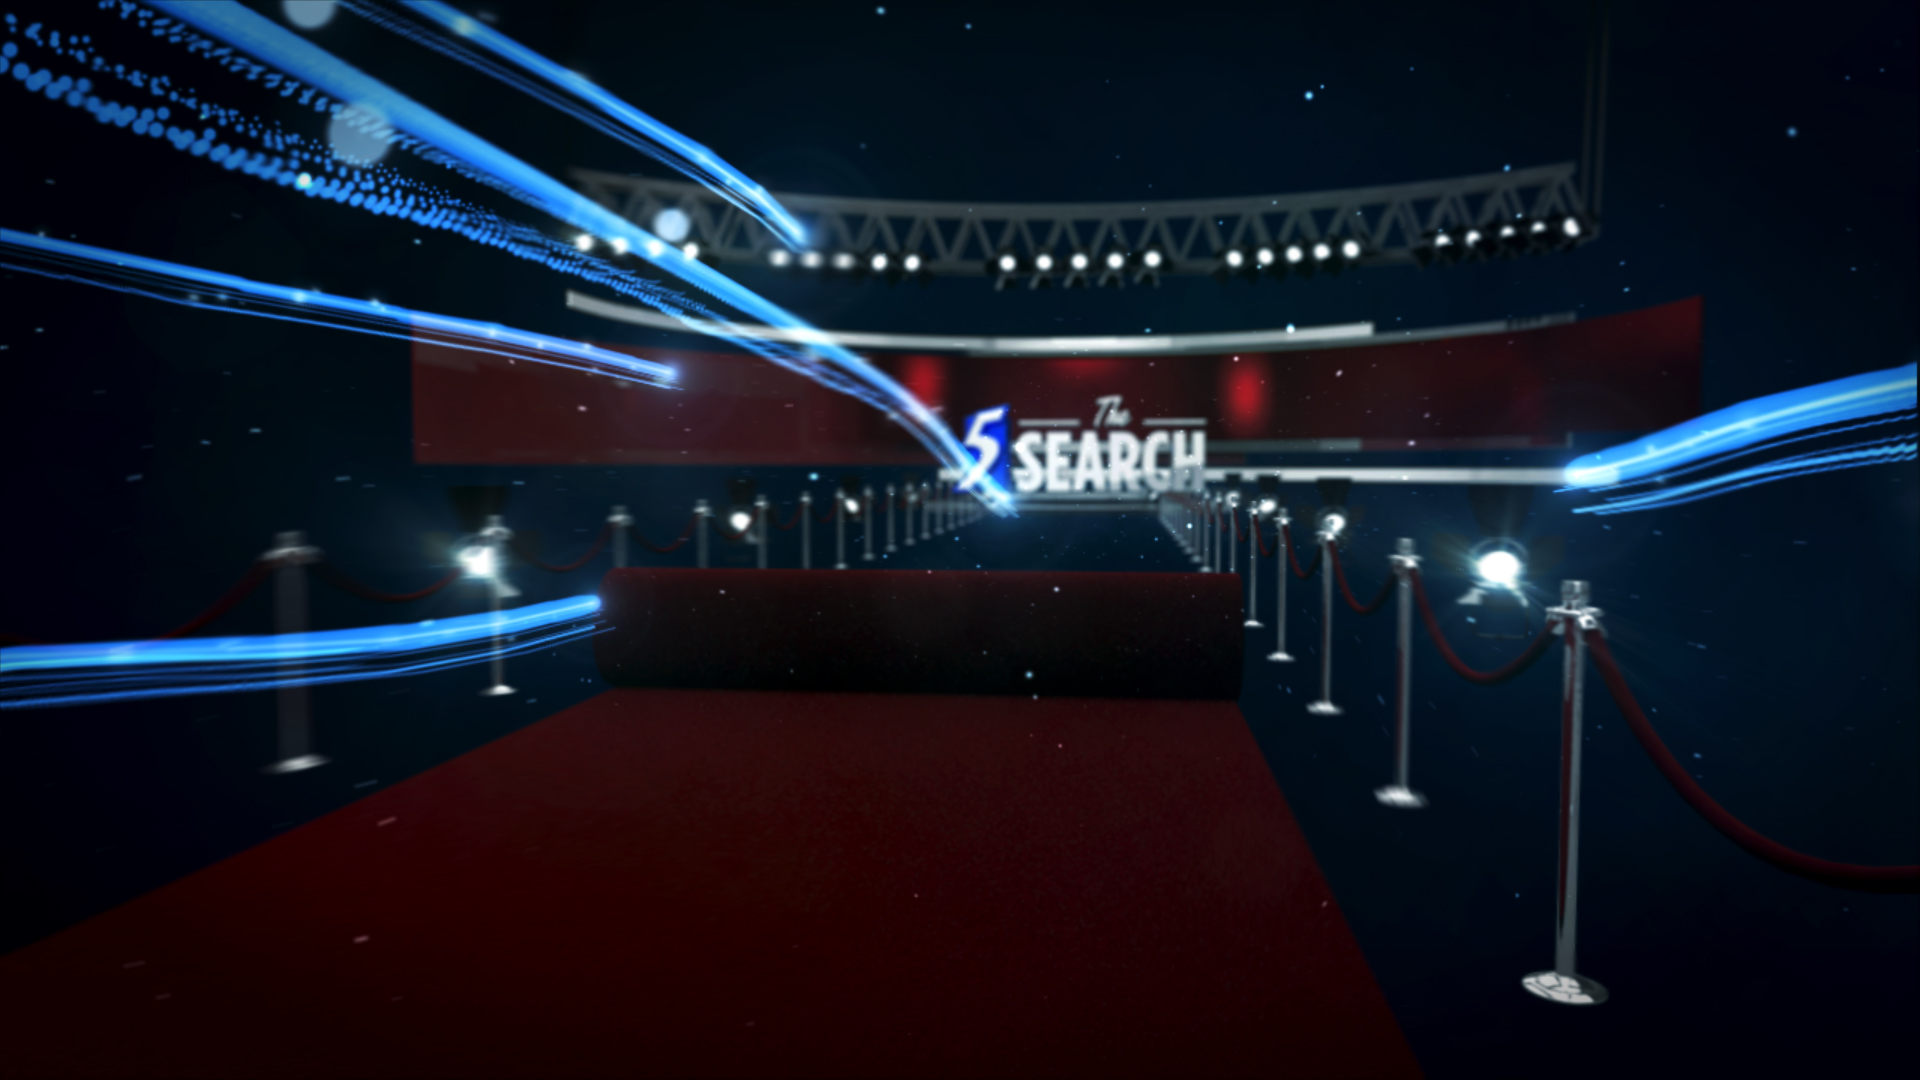 the5search_02